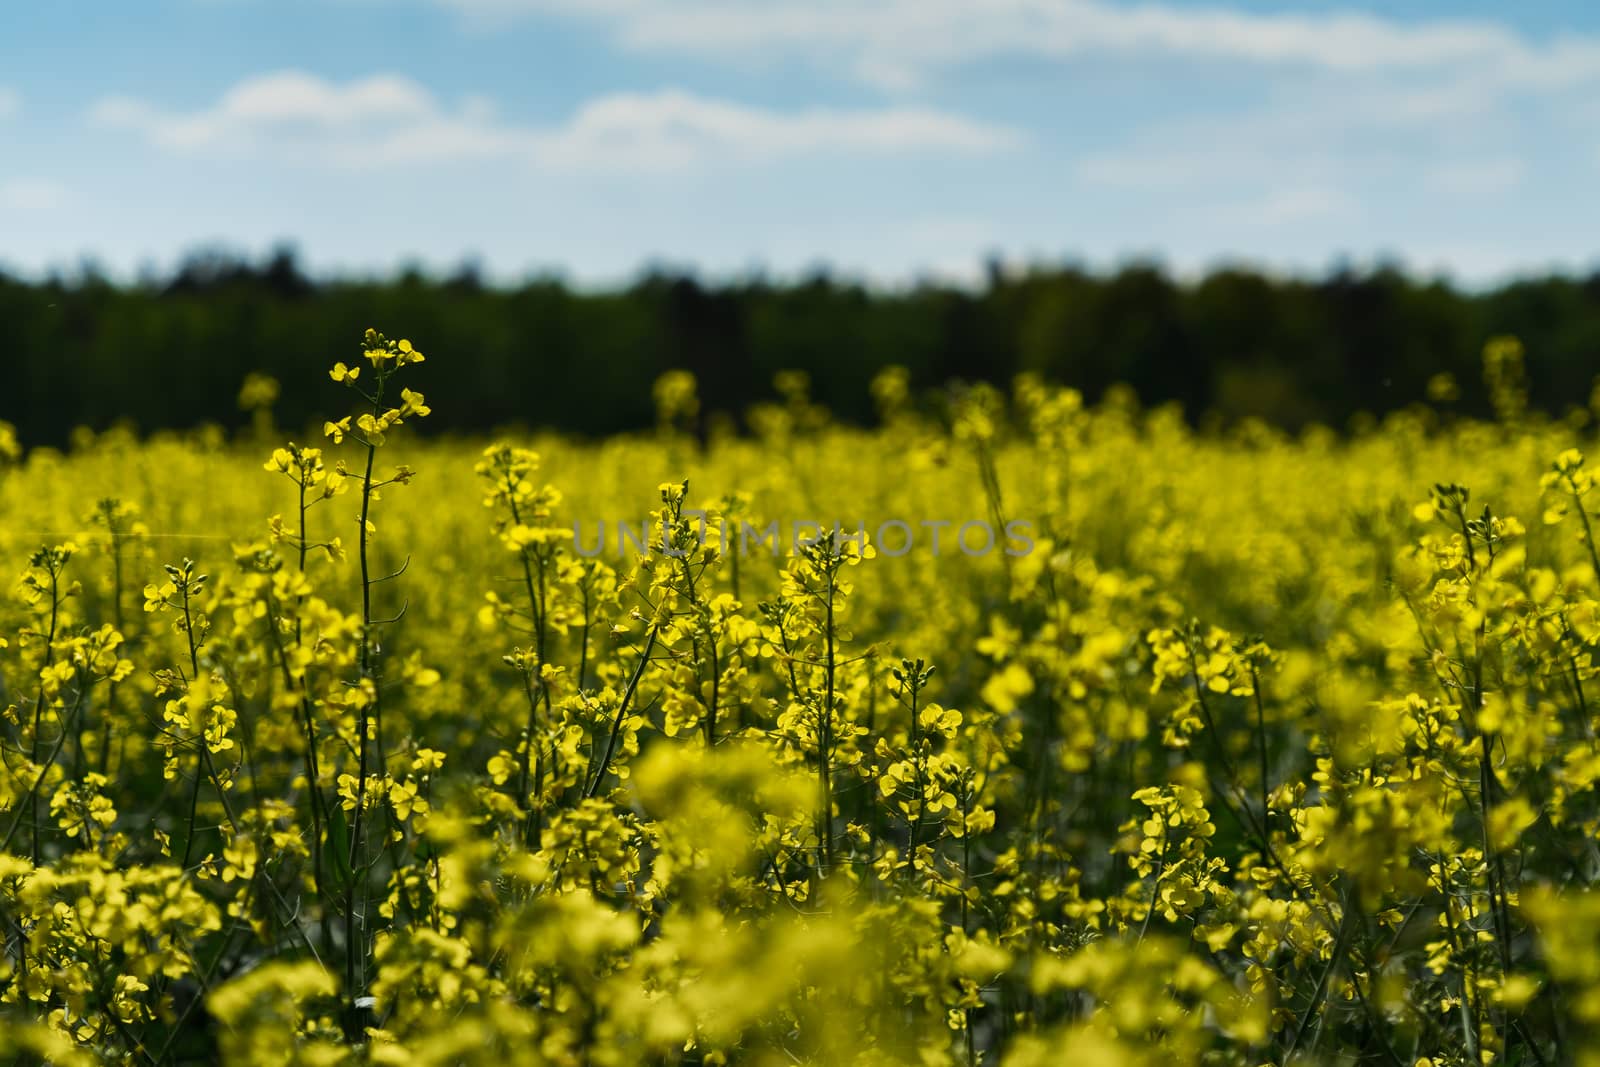 Yellow rape field with some flowers from the close perspective and the field and a strip of forest intended blurred in the background by geogif